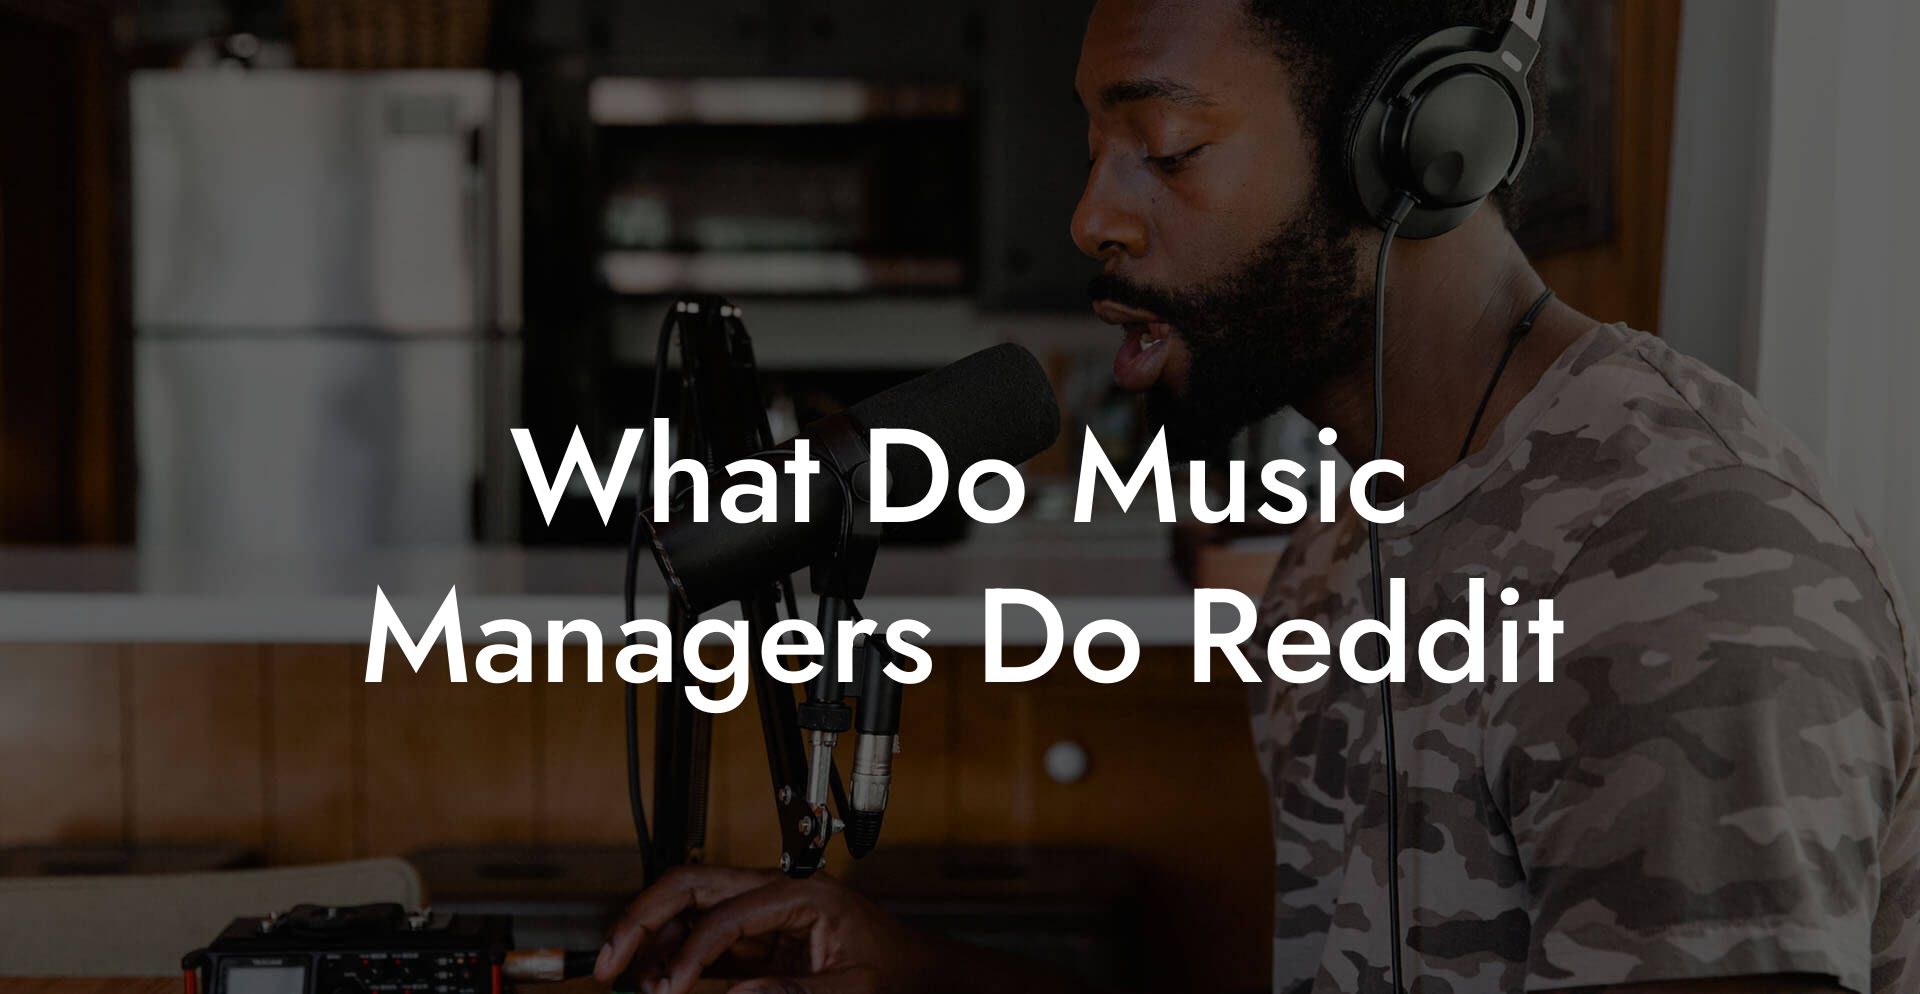 What Do Music Managers Do Reddit